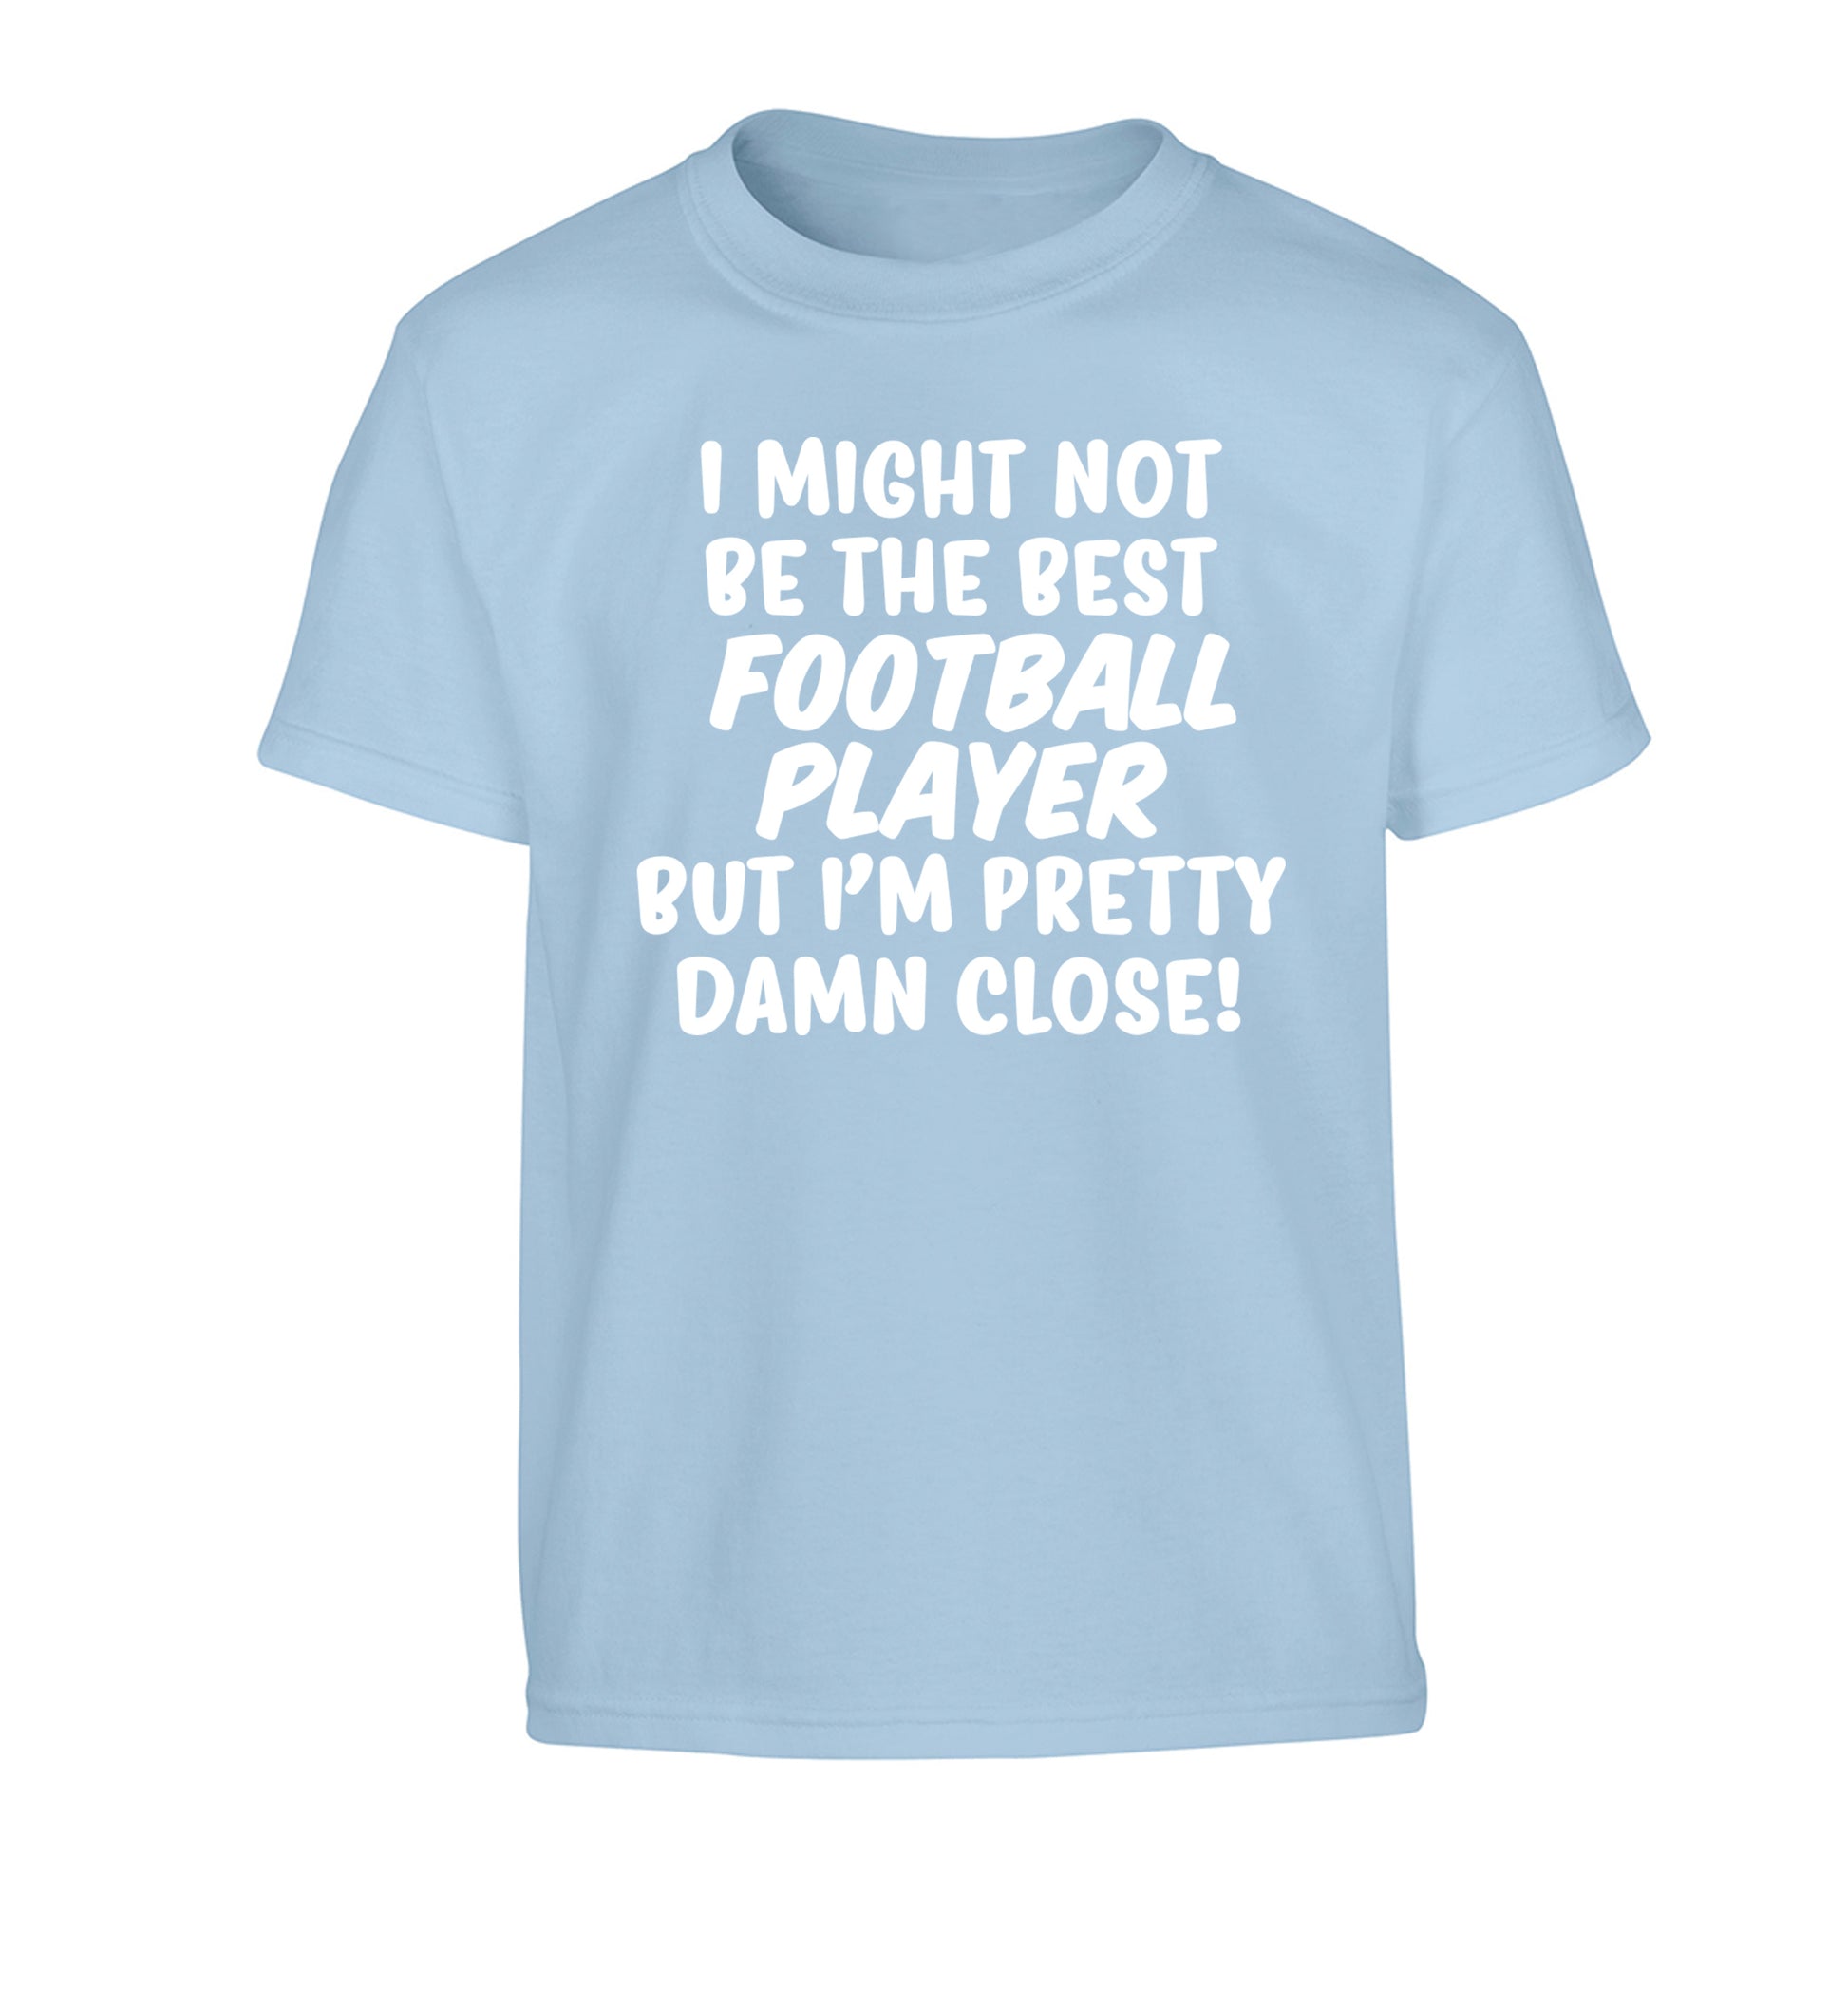 I might not be the best football player but I'm pretty close! Children's light blue Tshirt 12-14 Years